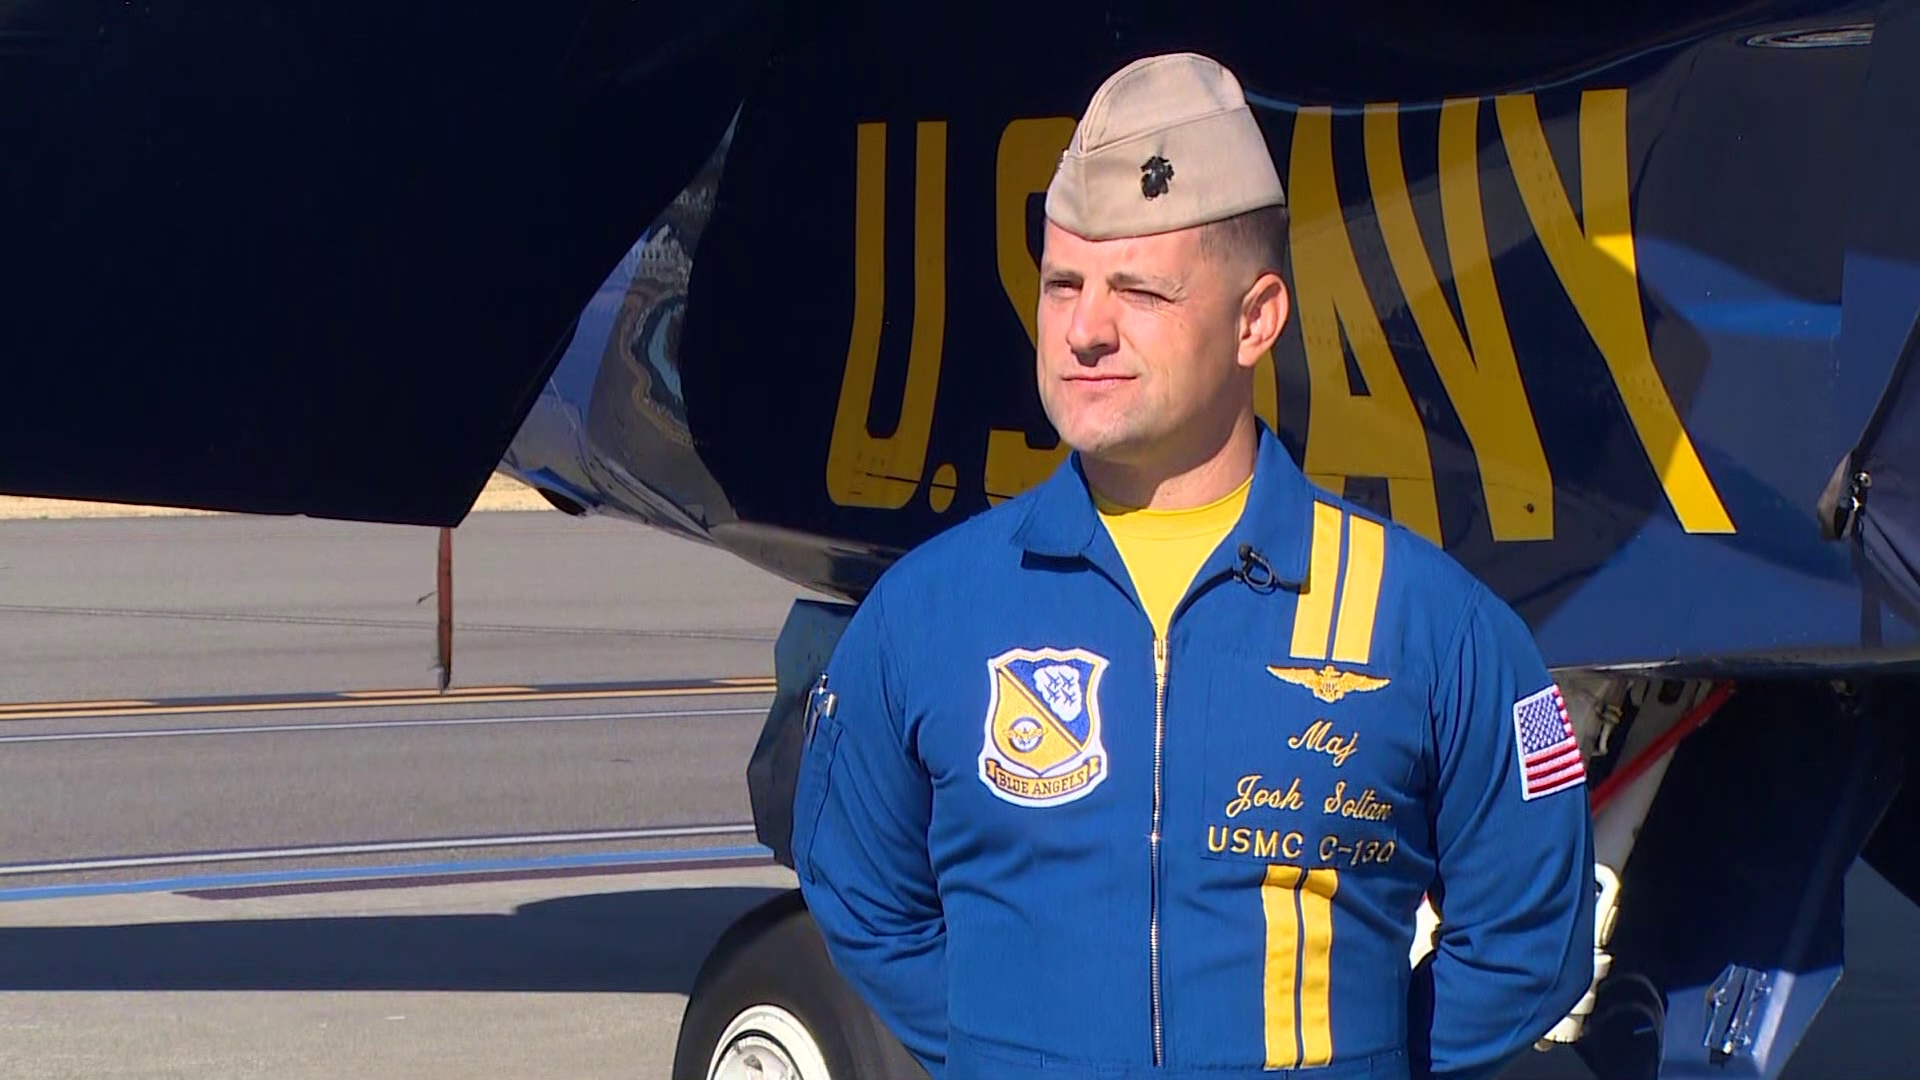 Major Josh Soltan is completing his third and final year with the Blue Angels. This year's Seafair will be his final performance in his home state.